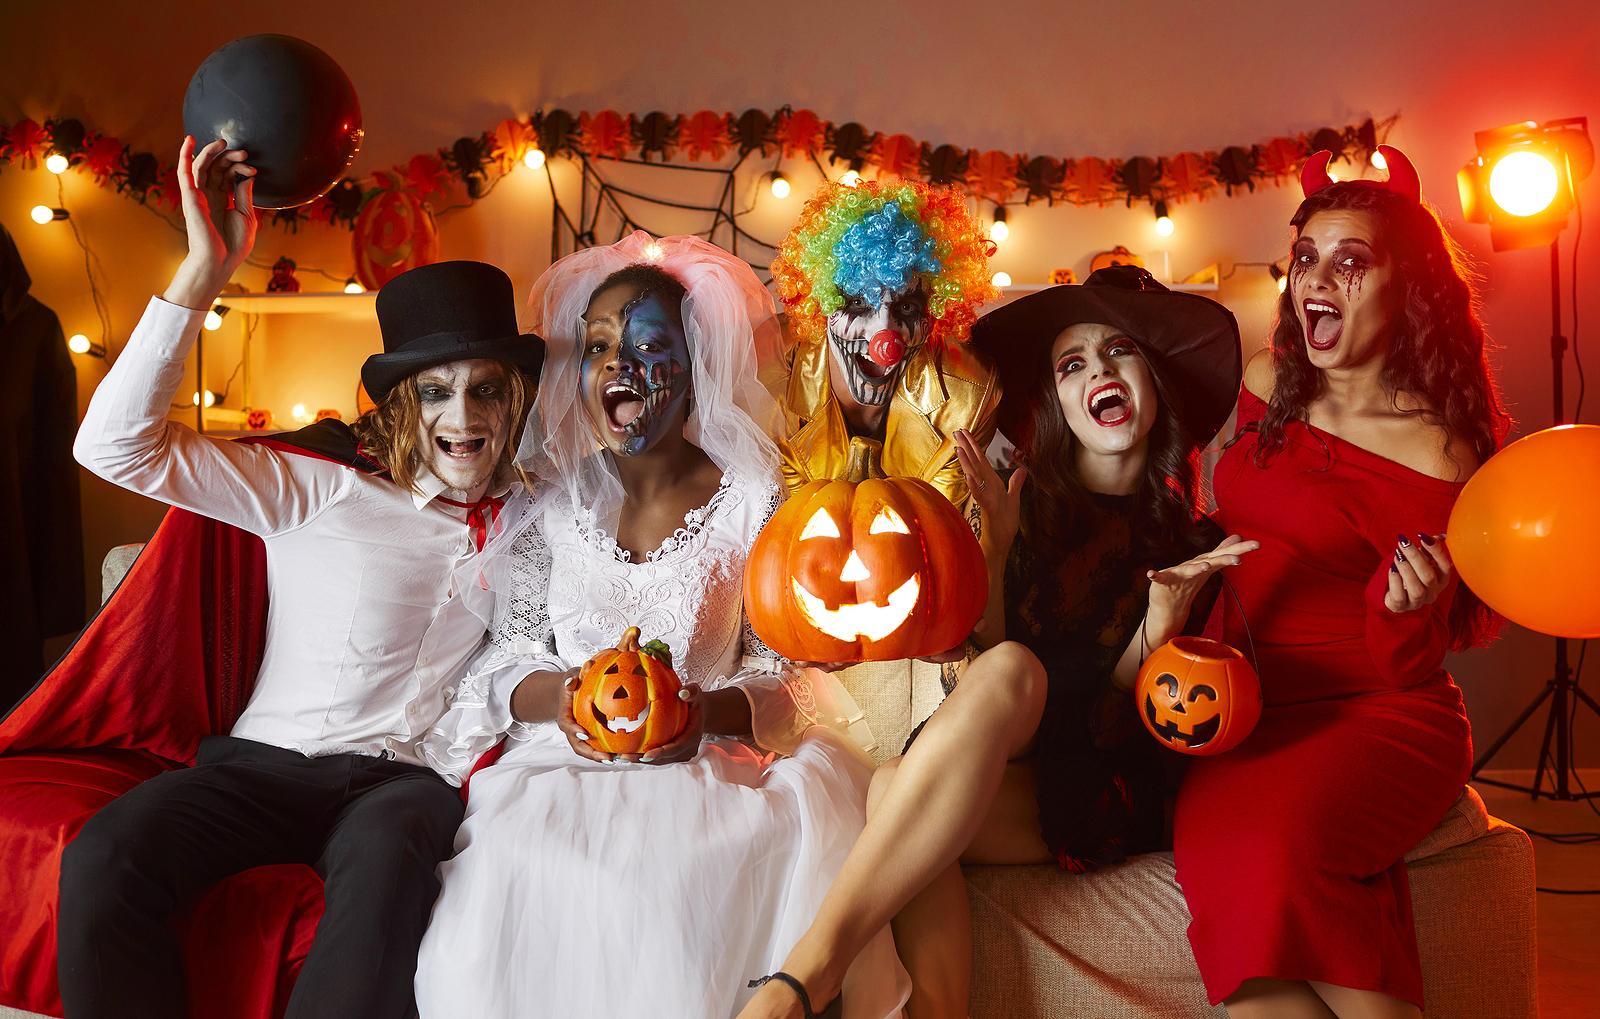 Top Things To Do For a Frightful Halloween In Manchester